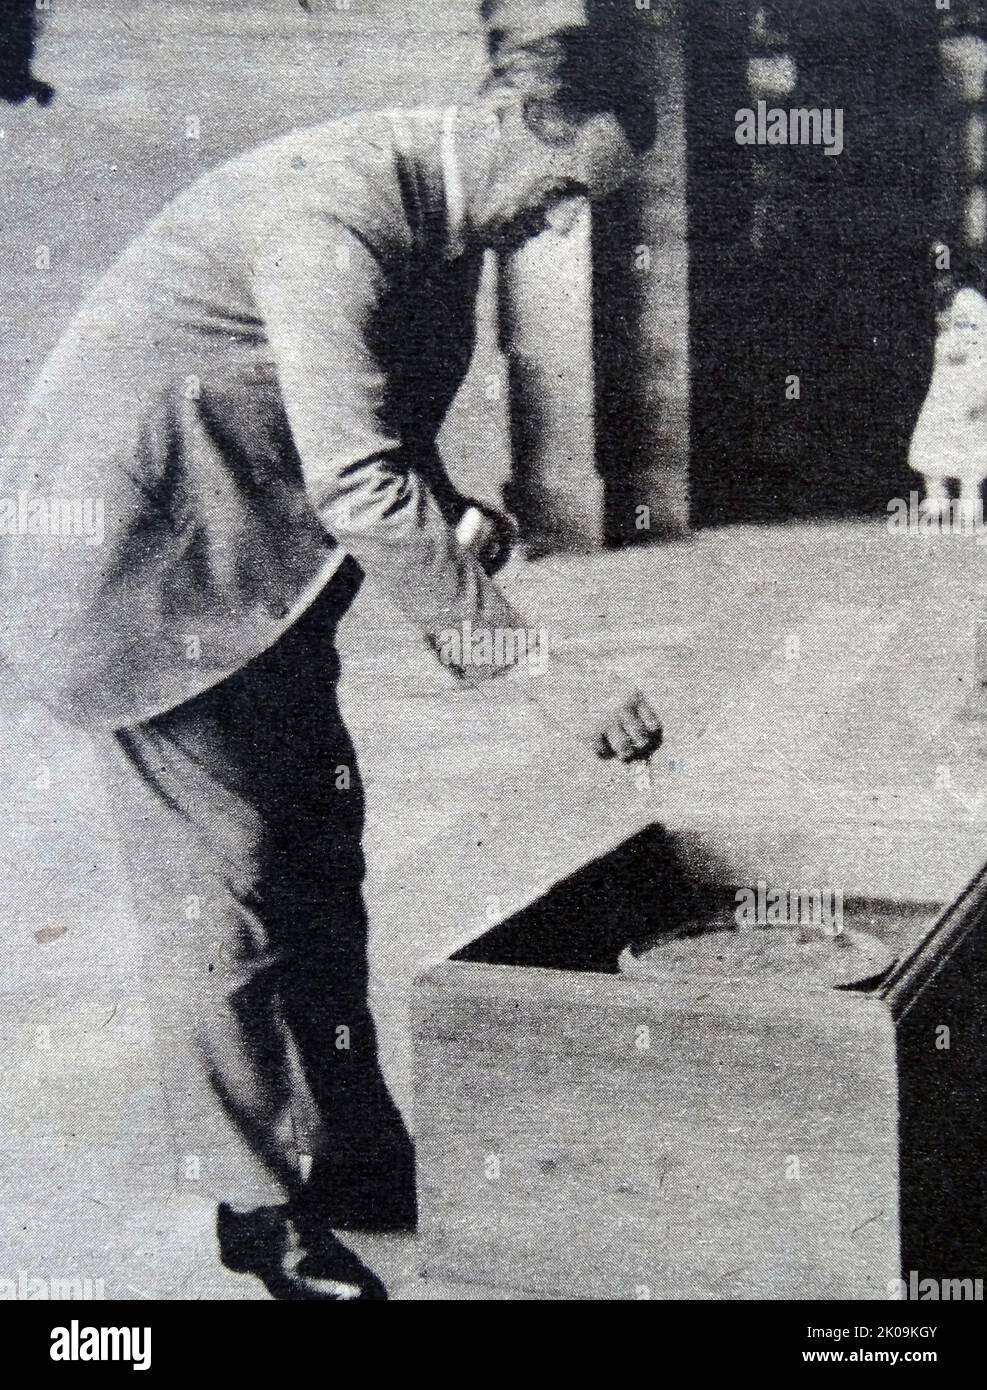 Viceroy of India, Lord Linlithgow feeds his turtle in India. Victor Alexander John Hope, 2nd Marquess of Linlithgow, KG, KT, GCSI, GCIE, OBE, TD, PC, FRSE (24 September 1887 - 5 January 1952) was a British Unionist politician, agriculturalist, and colonial administrator. He served as Governor-General and Viceroy of India from 1936 to 1943. He was usually referred to simply as Linlithgow. Stock Photo